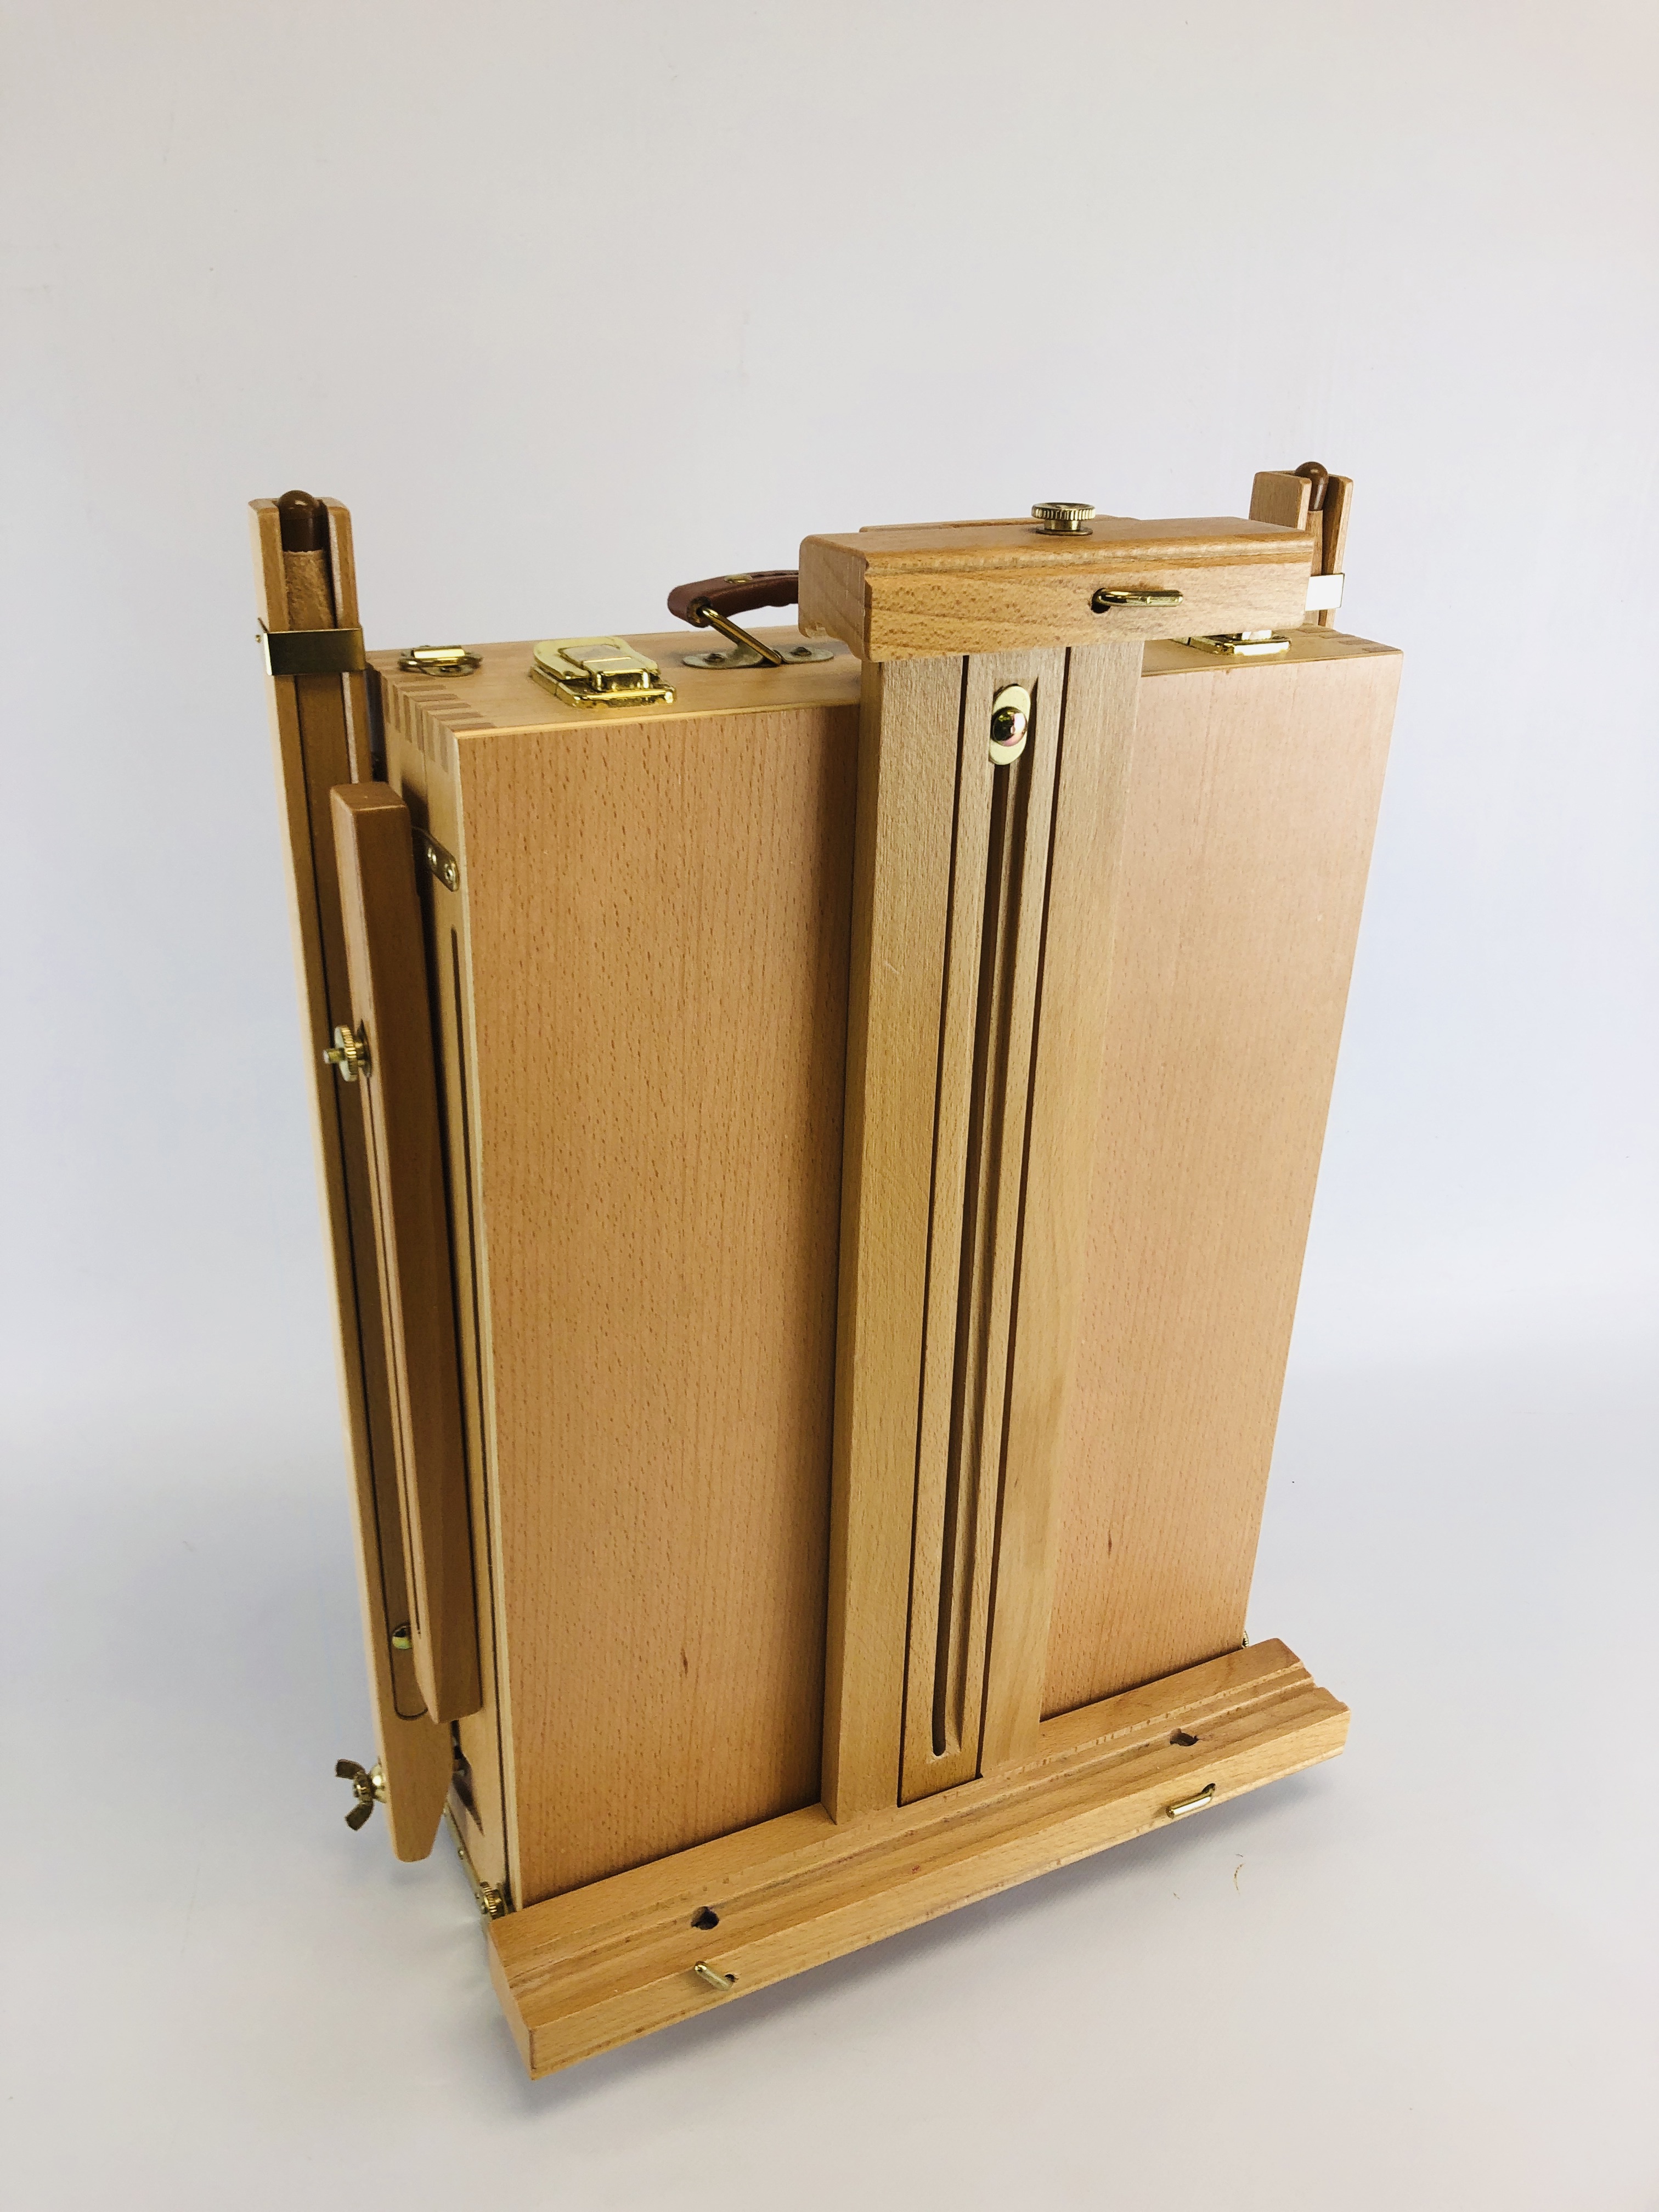 A WOODEN TRAVELLING ARTIST EASEL. - Image 3 of 3